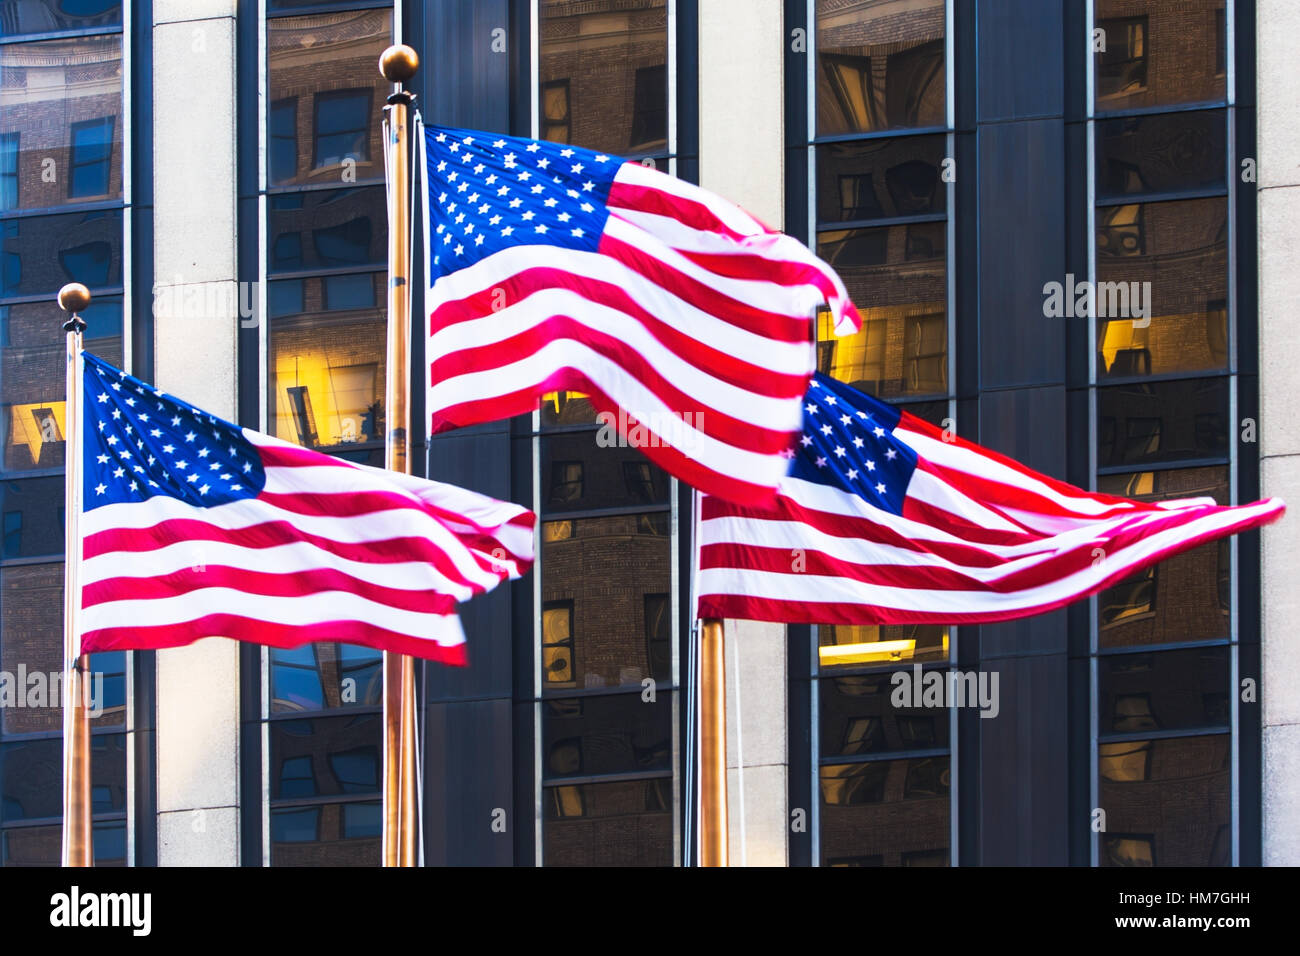 USA, New York, American flags in front of office building Stock Photo